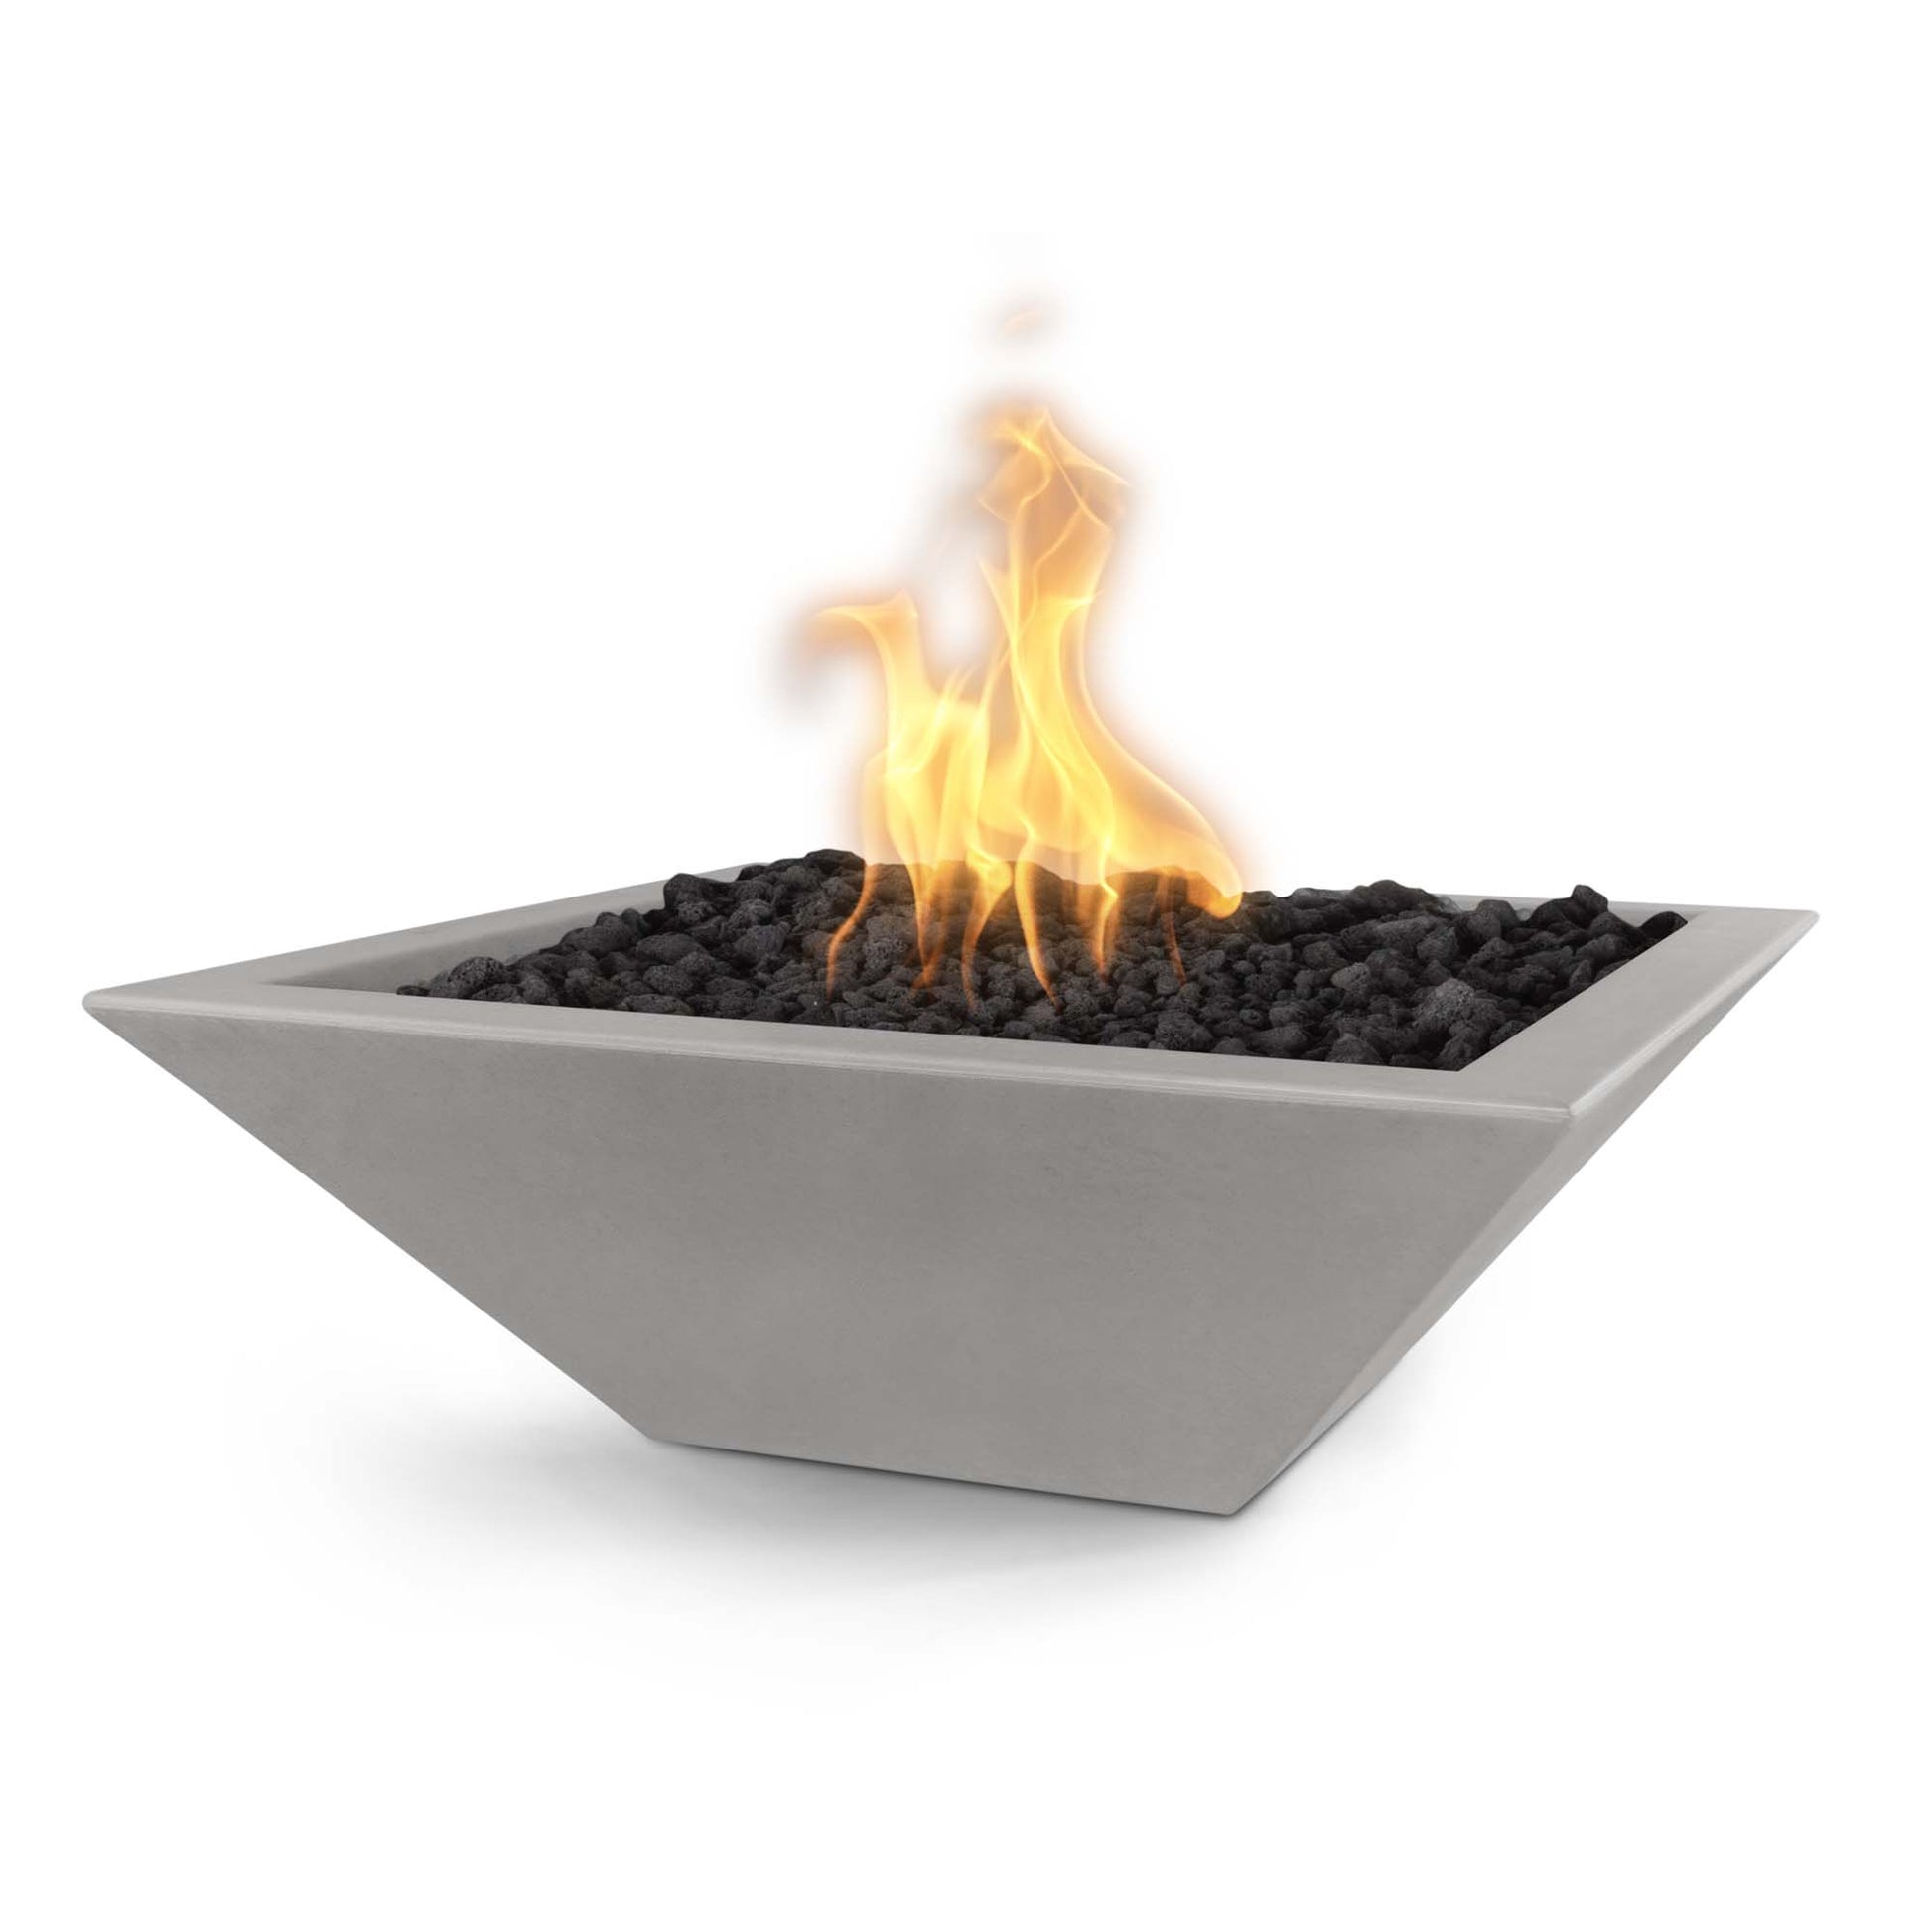 The Outdoor Plus Square Maya 24" Black GFRC Concrete Natural Gas Fire Bowl with Match Lit with Flame Sense Ignition